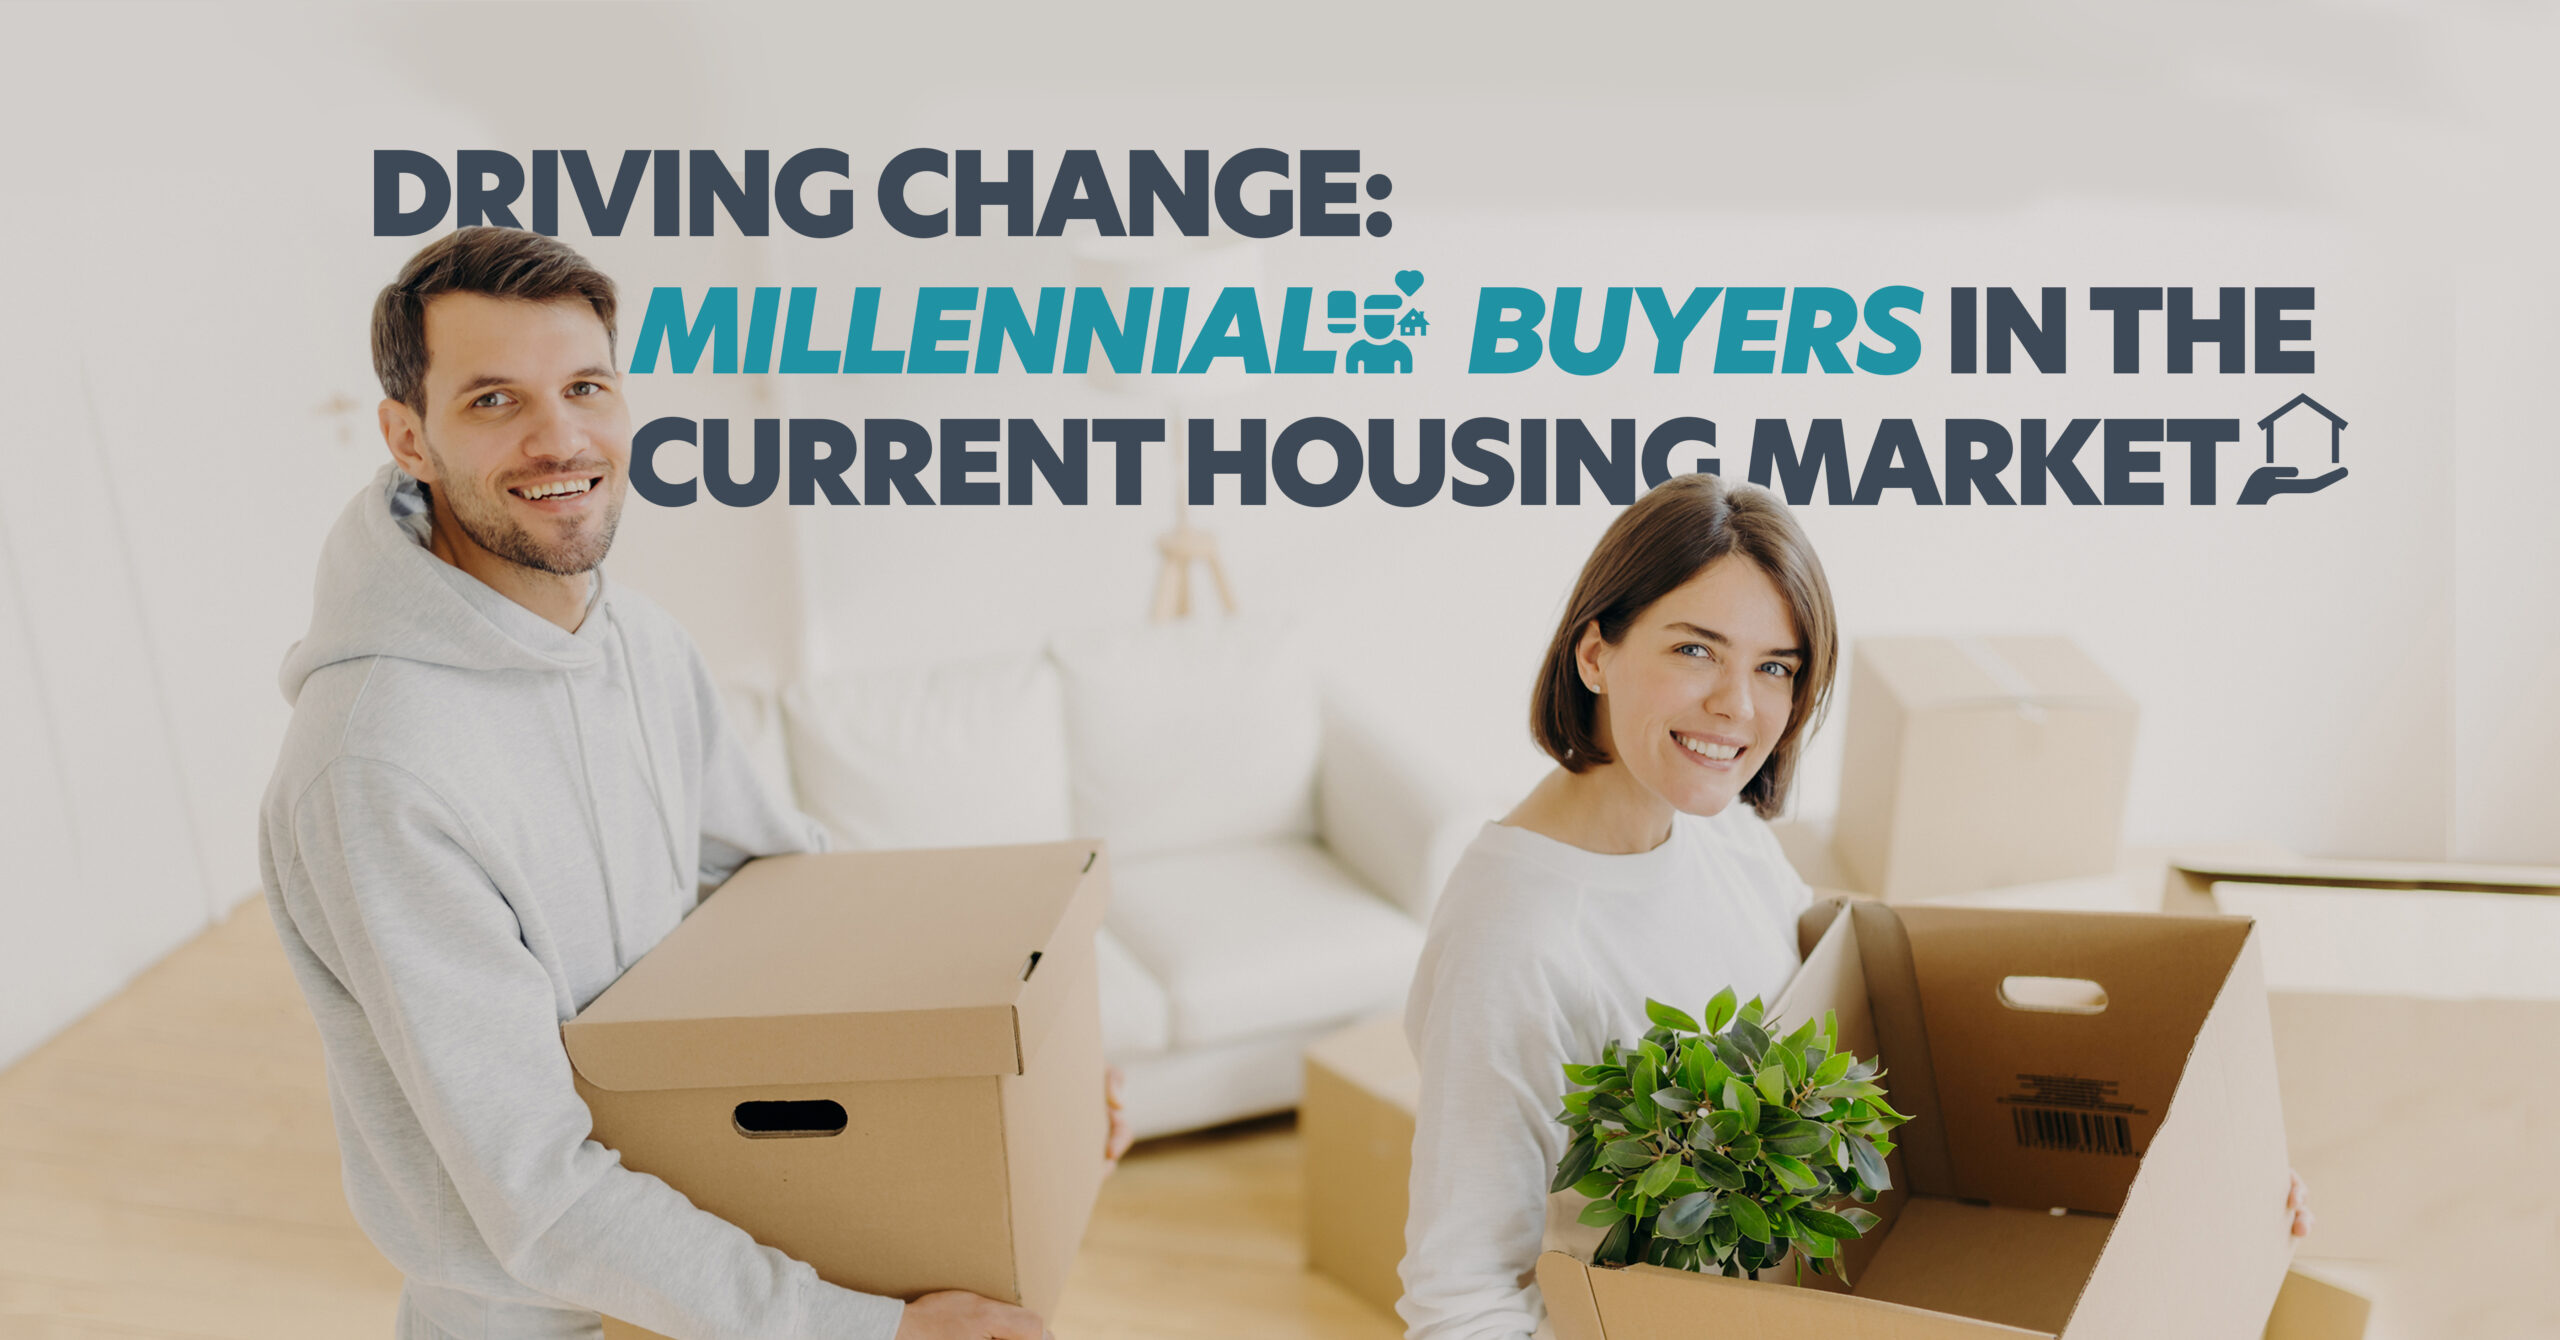 Driving Change: Millennial Buyers in the Current Housing Market